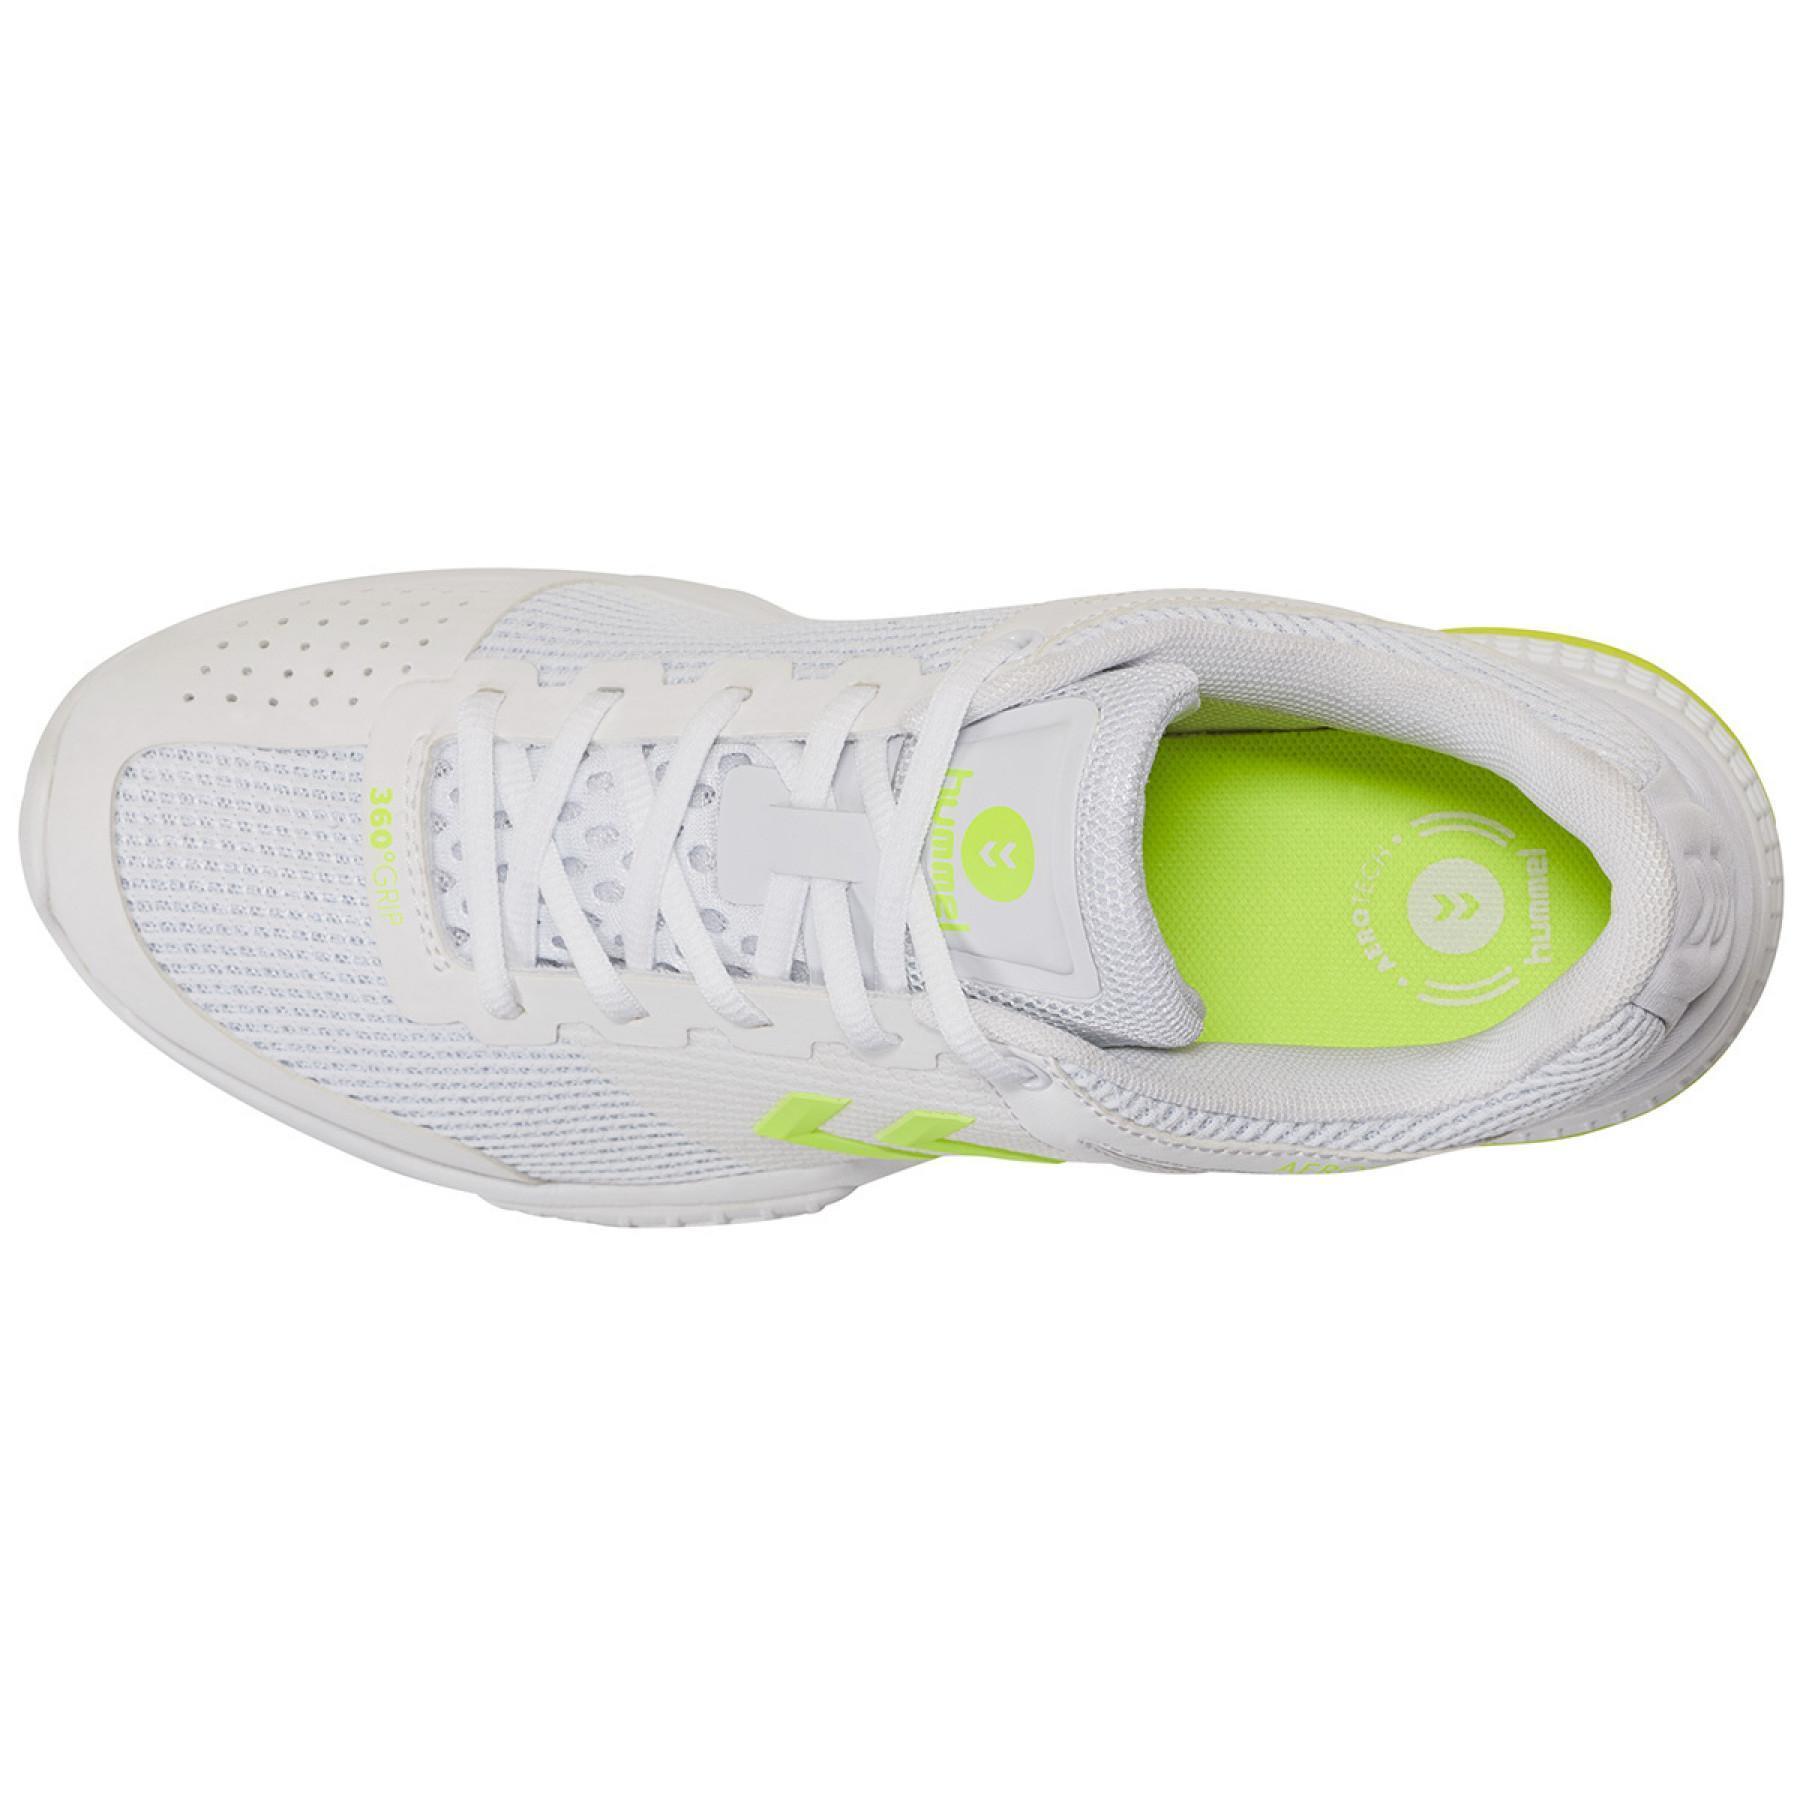 Shoes Hummel aerocharge hb180 rely 3.0